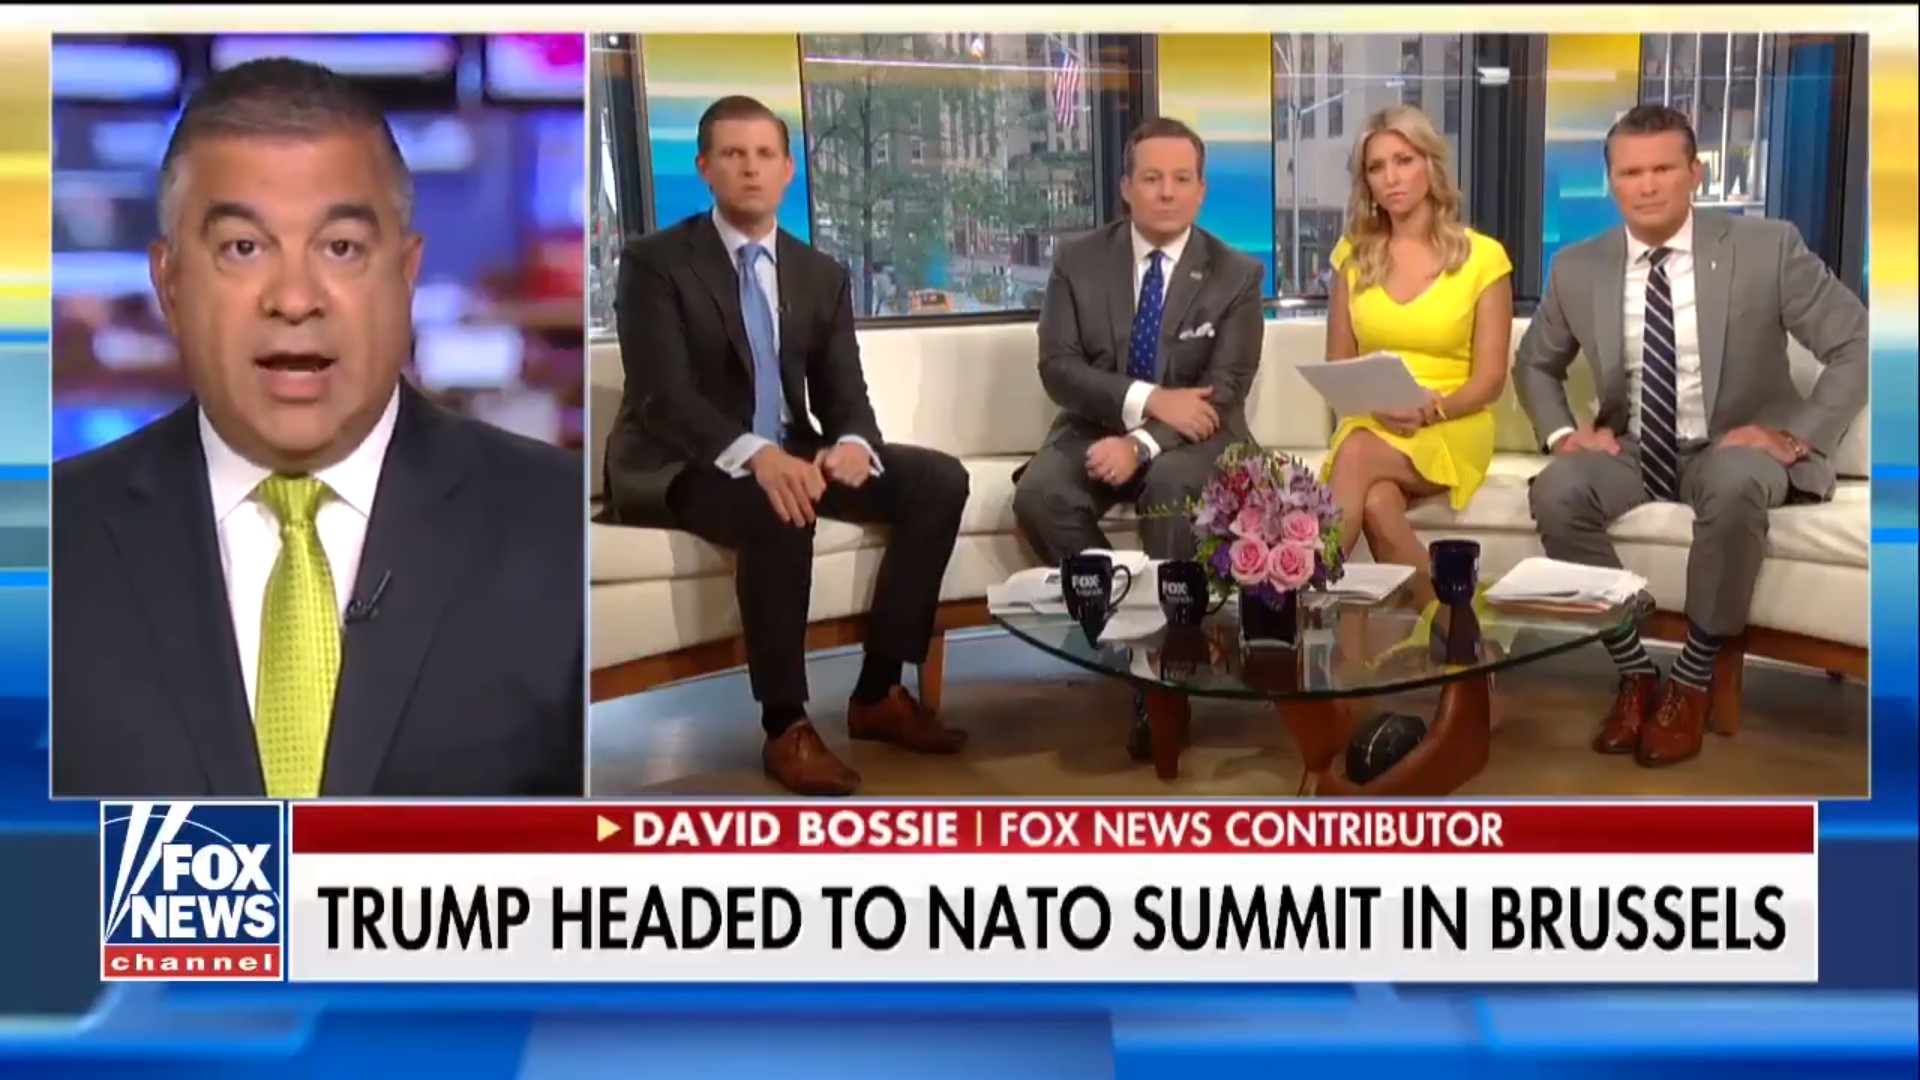 Fox Contributor David Bossie Returns To Air Two Weeks After His ‘Cotton-Picking’ Remarks